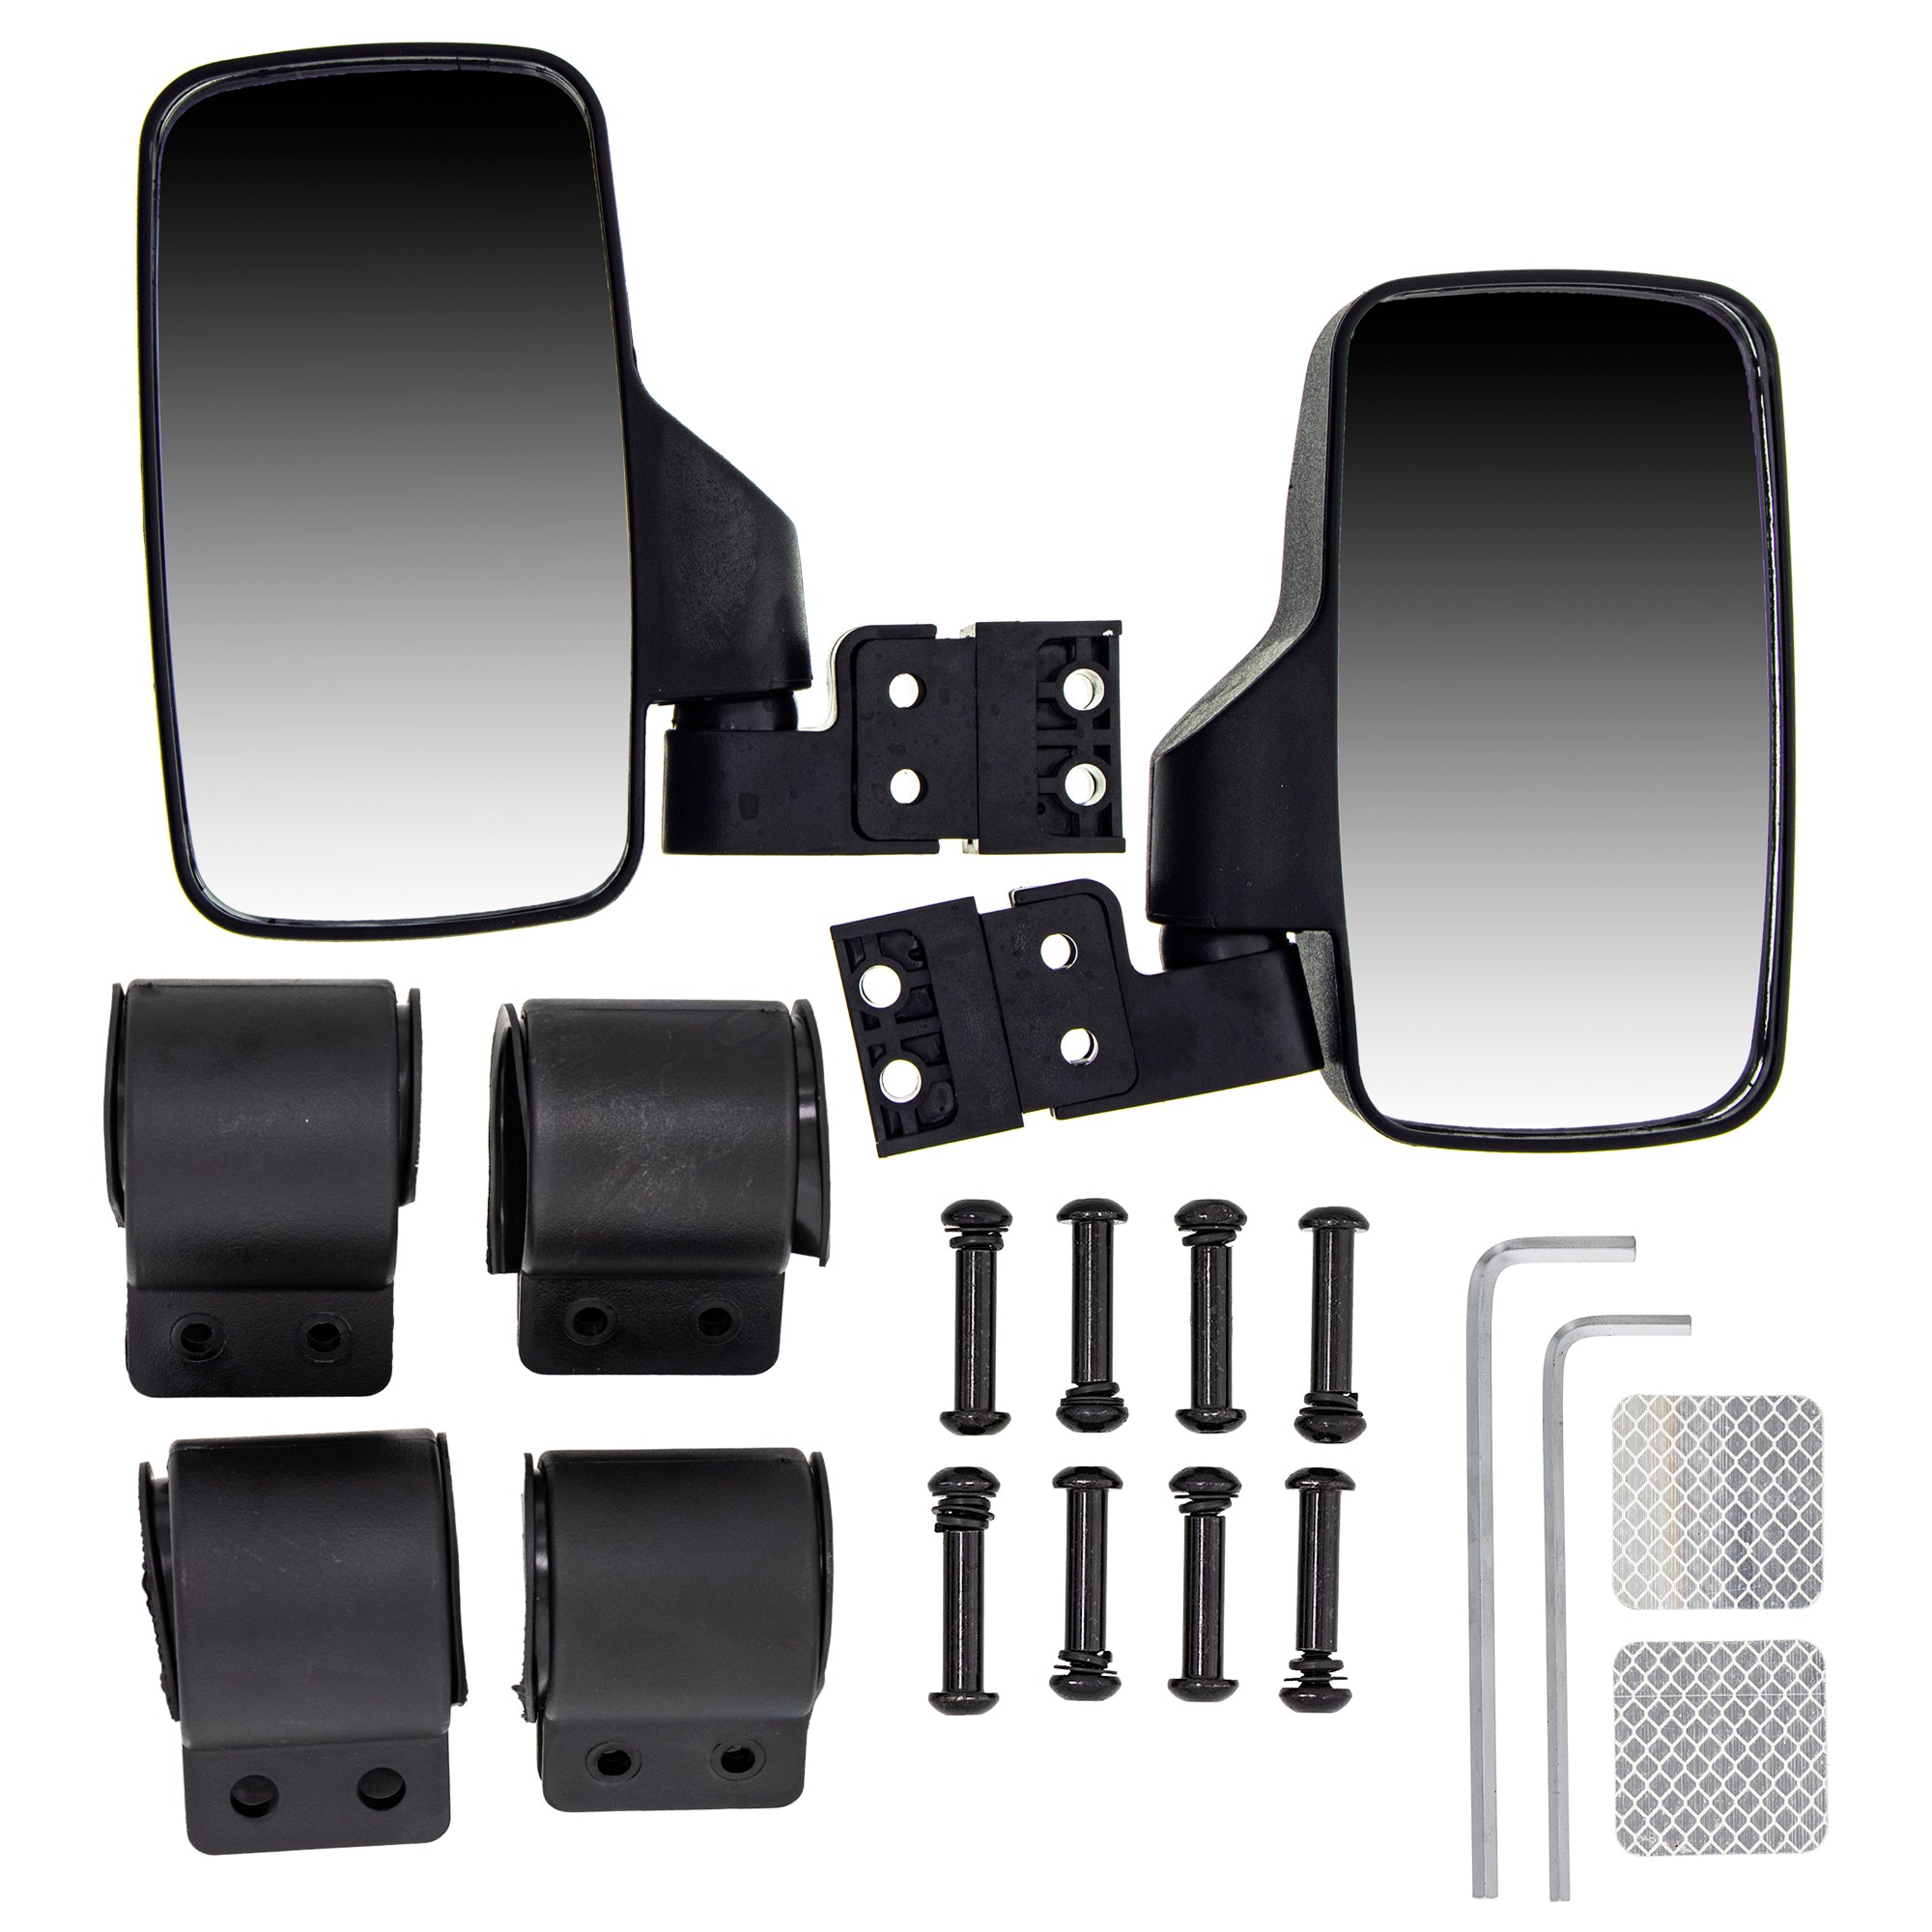 Black Side View Mirror Set For Polaris Can-Am Arctic Cat MK1002939